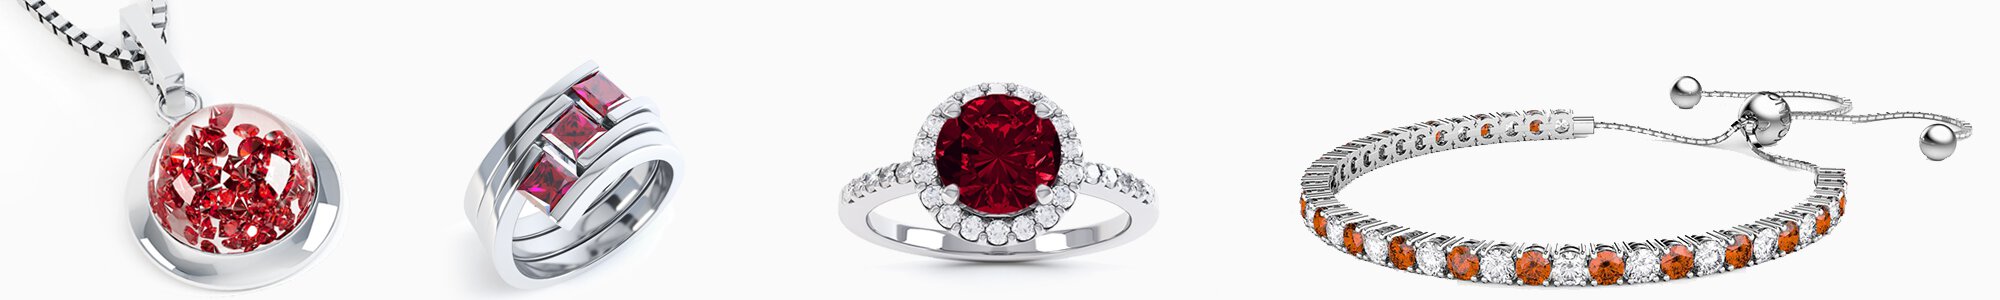 Garnet Jewelry - from Earrings studs and drops to Pendants to Engagement Rings